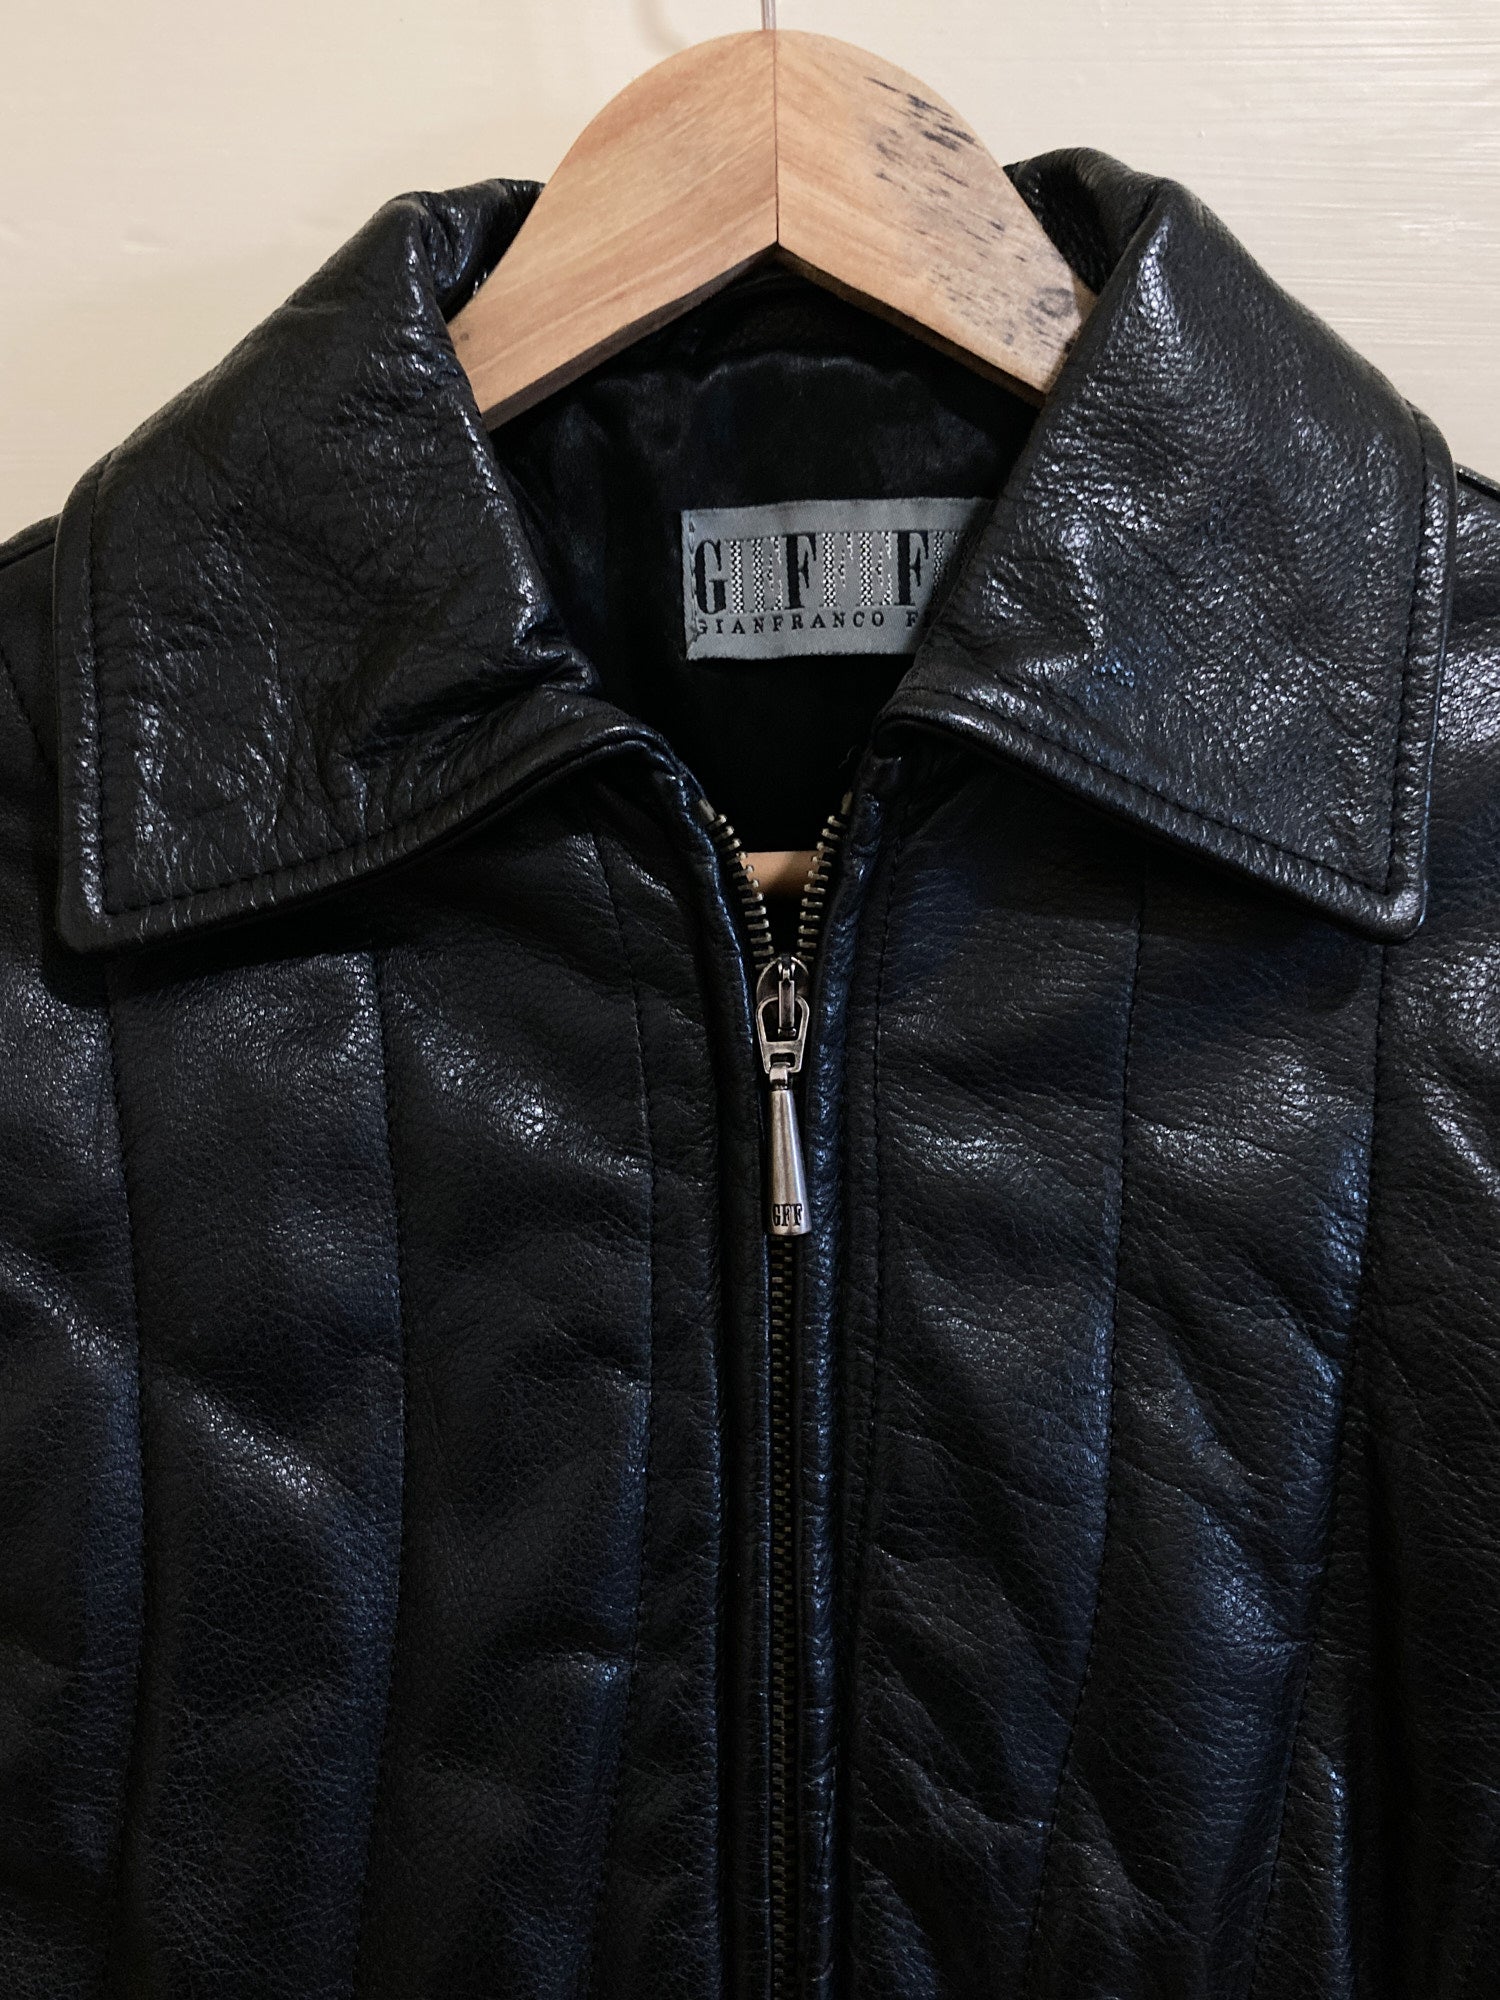 Gianfranco Ferre black zipped leather jacket with undulating channel stitch - S